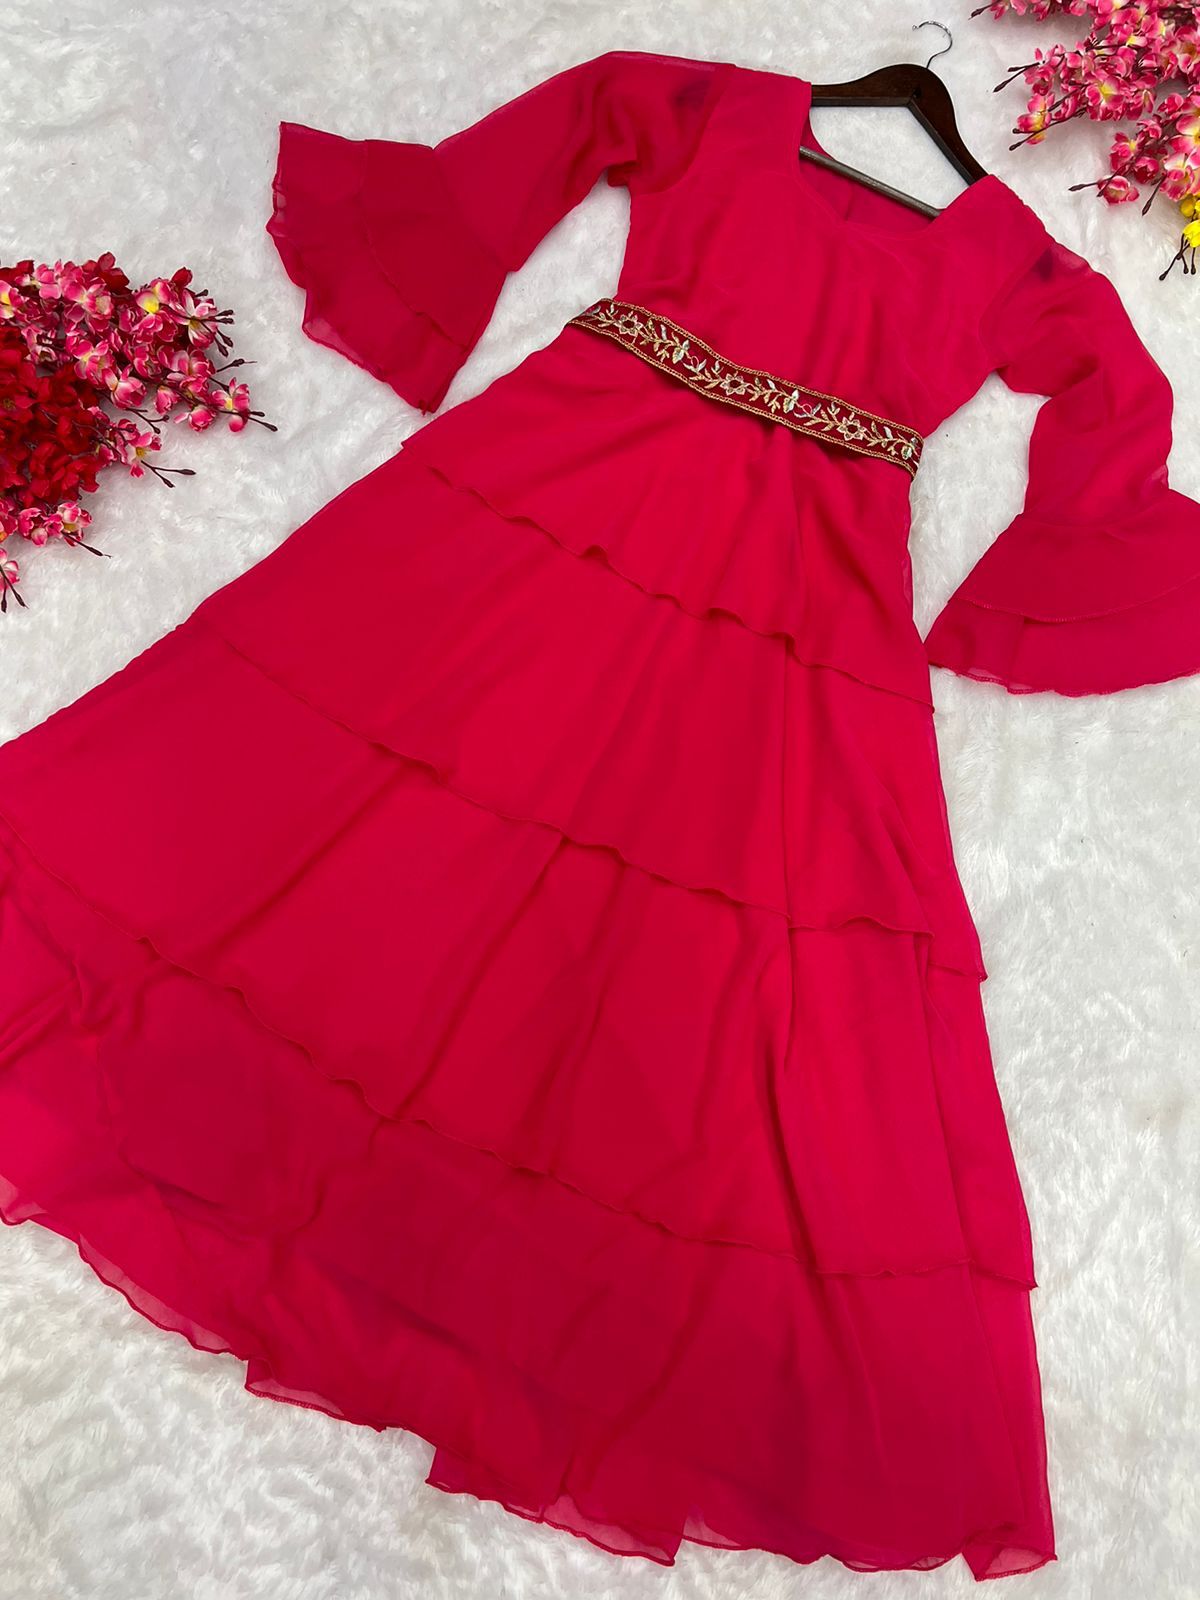 Girls Red Gown - Buy Trendy New Red Party Wear Gown Online